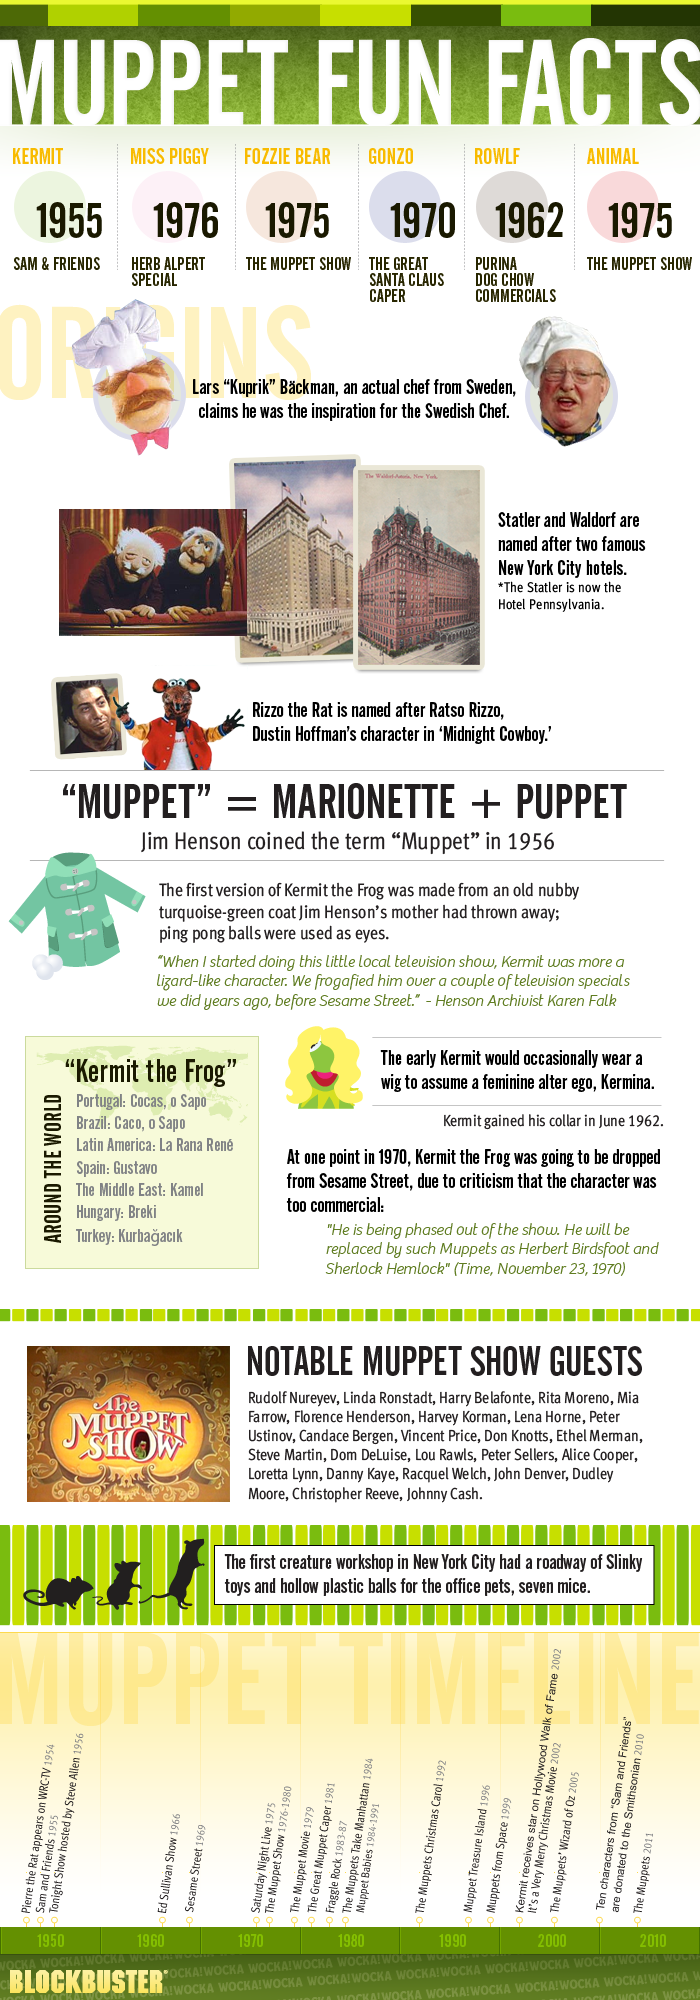 Muppets Fun Facts